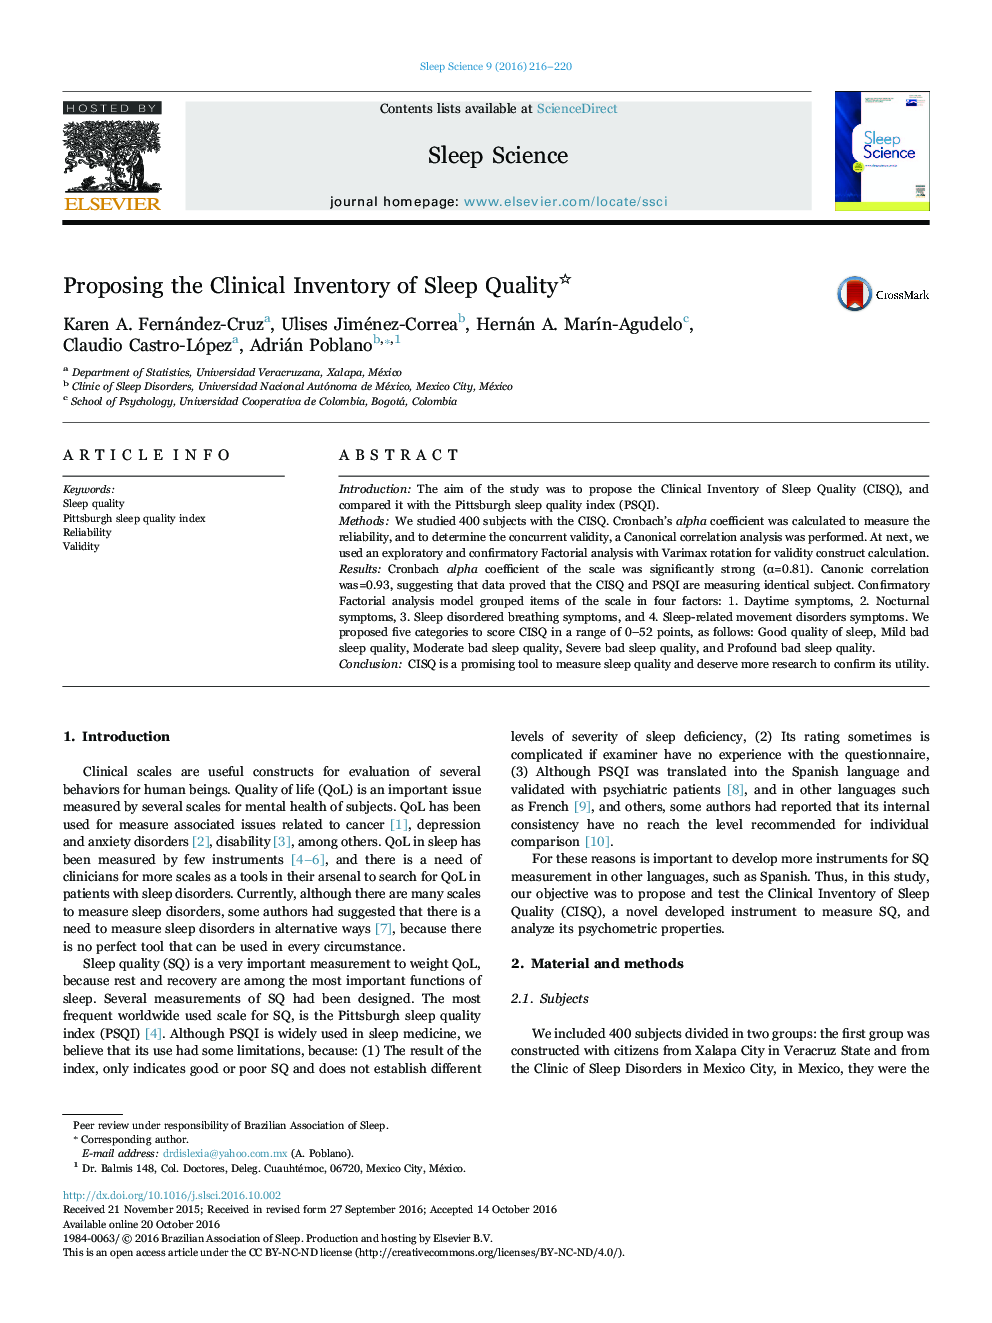 Proposing the Clinical Inventory of Sleep Quality